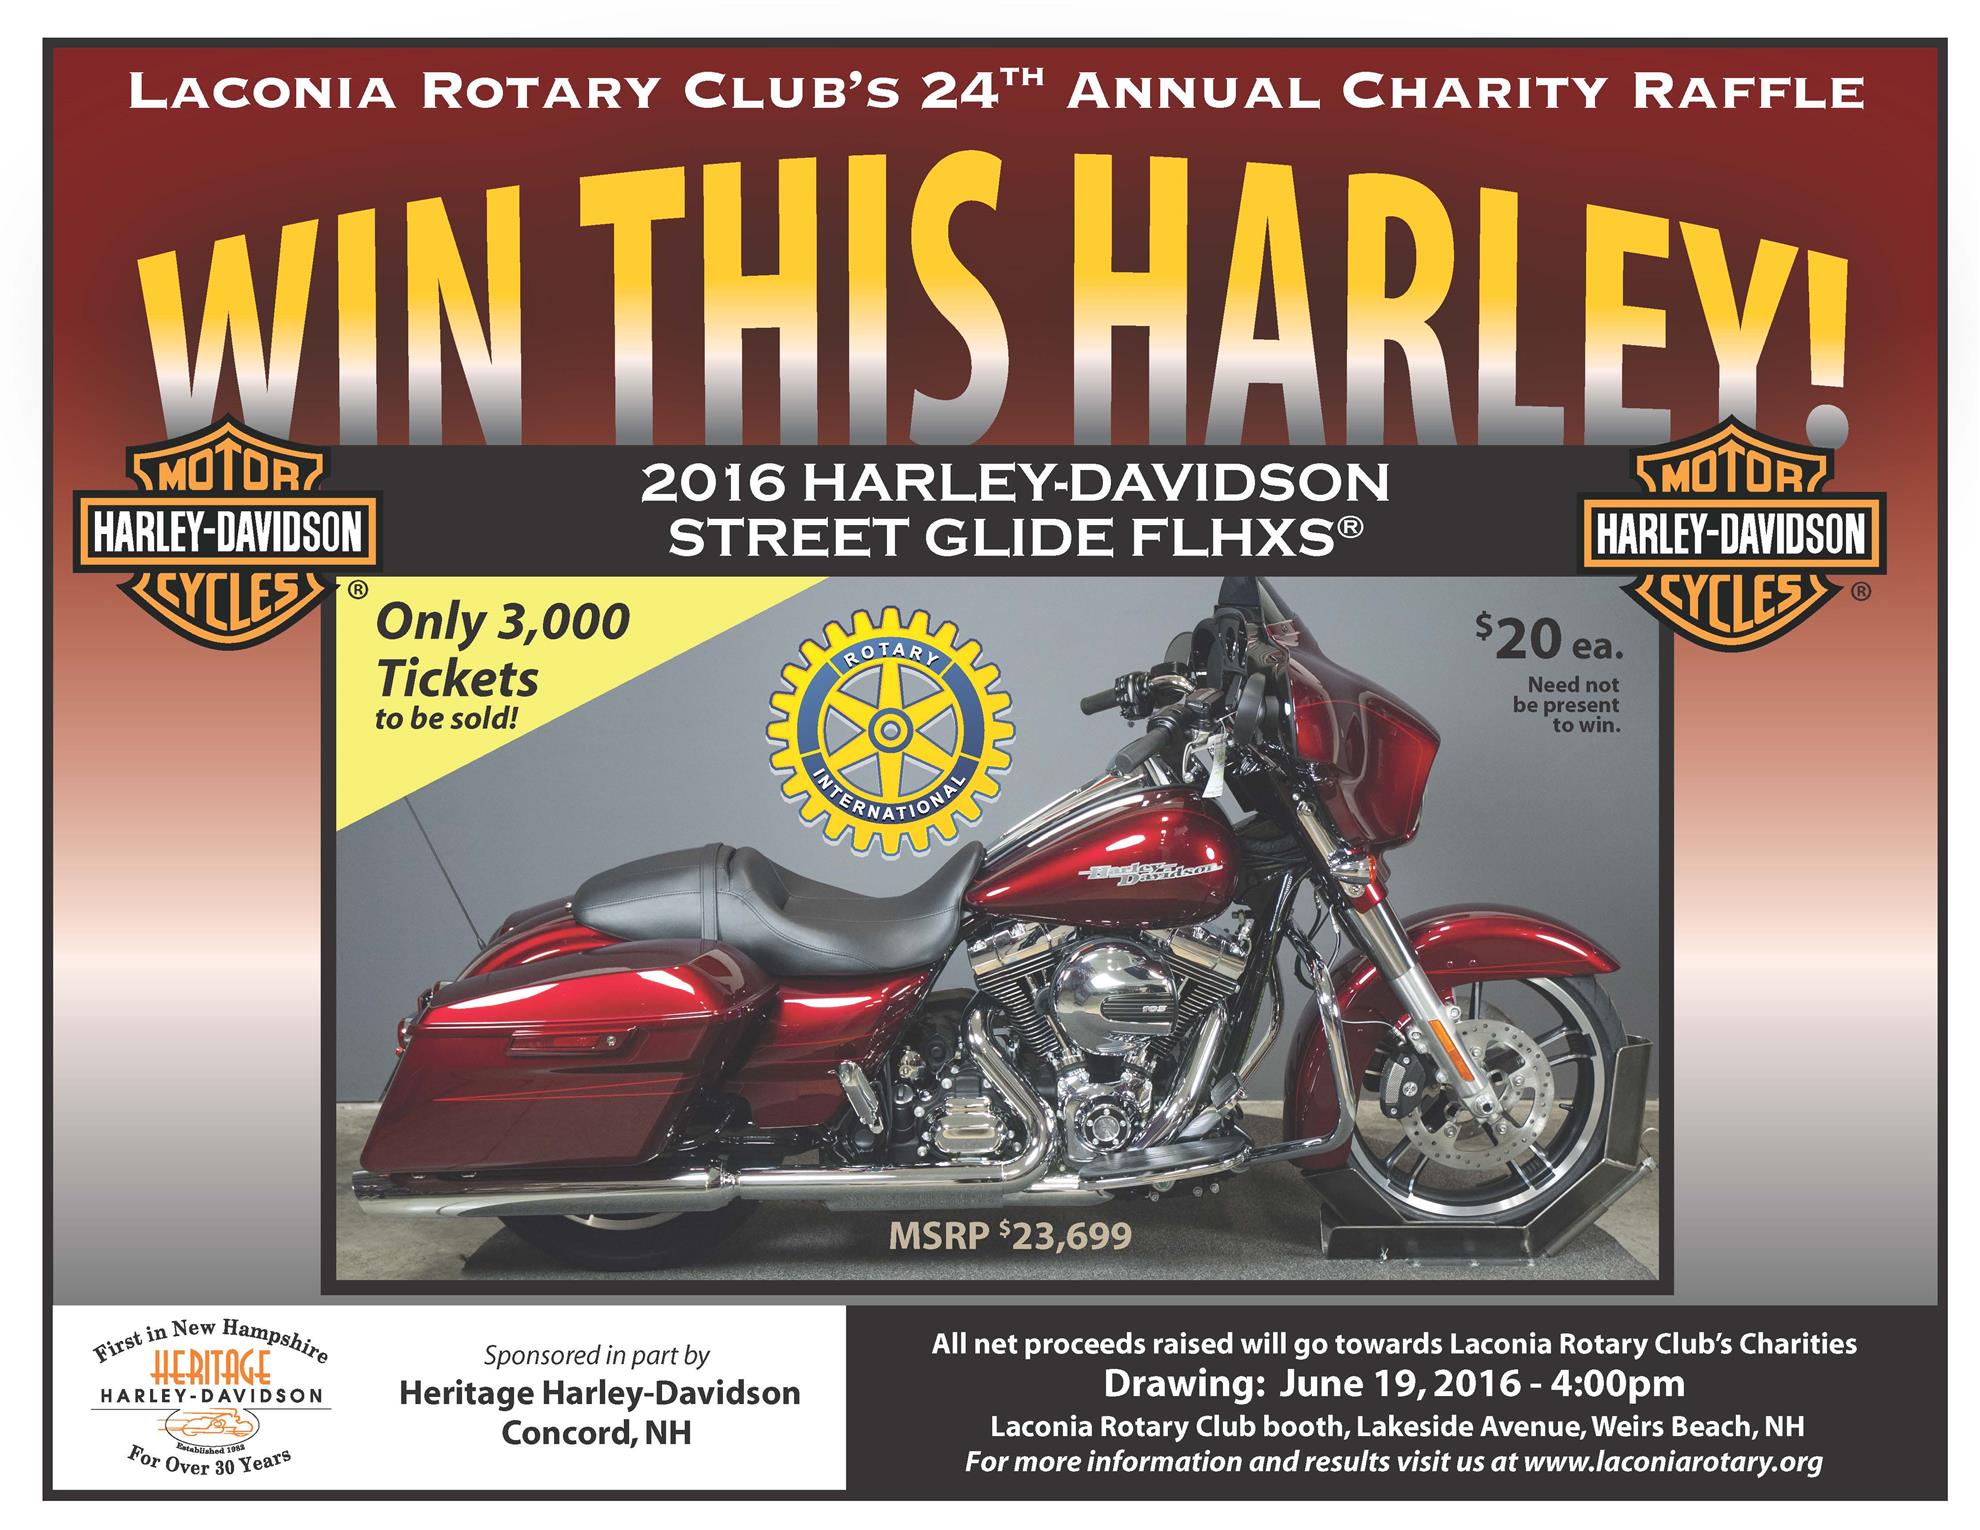 24th Annual Charity Motorcycle Raffle Rotary Club of Laconia